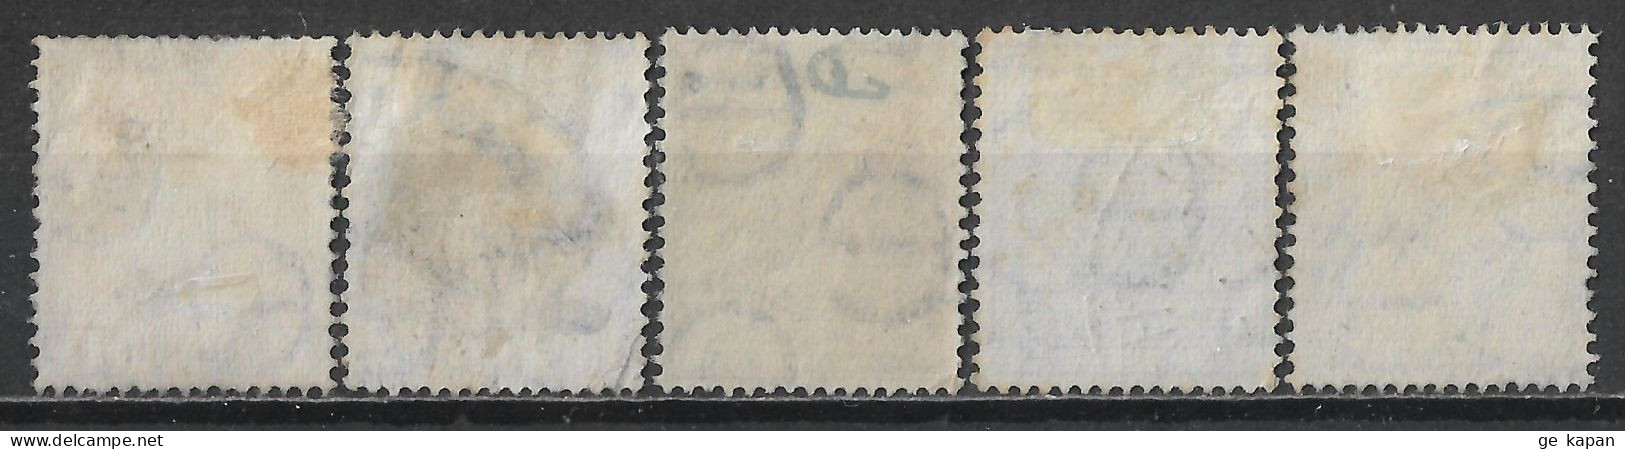 1940-1941 IRELAND SET OF 5 USED STAMPS (Michel # 72A,74A,75A,76AI,77A) CV €1.80 - Gebraucht